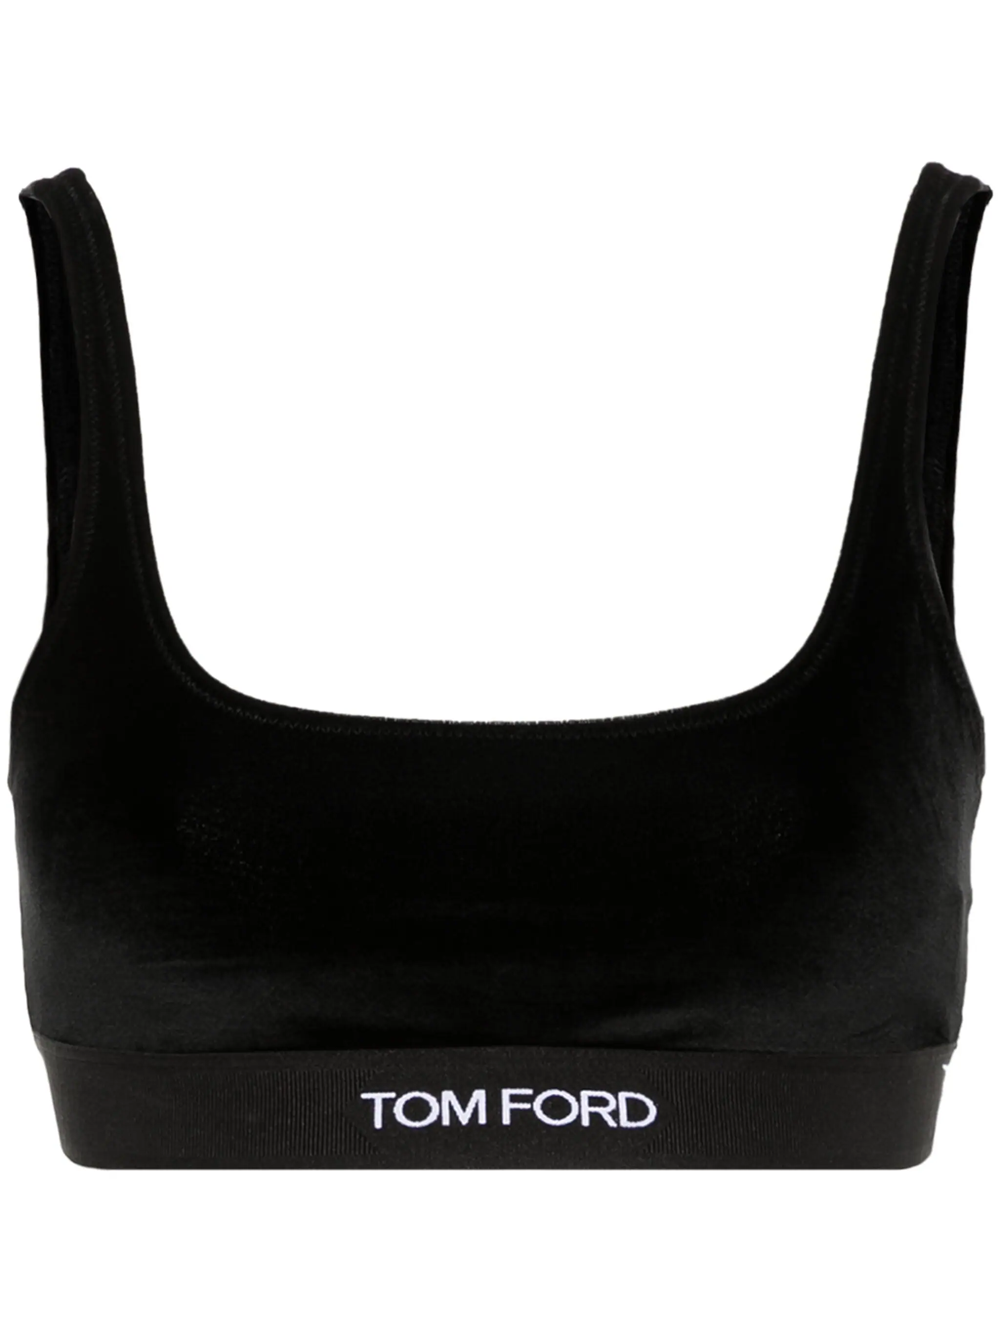 TOM FORD TOP WITH JACQUARD EFFECT